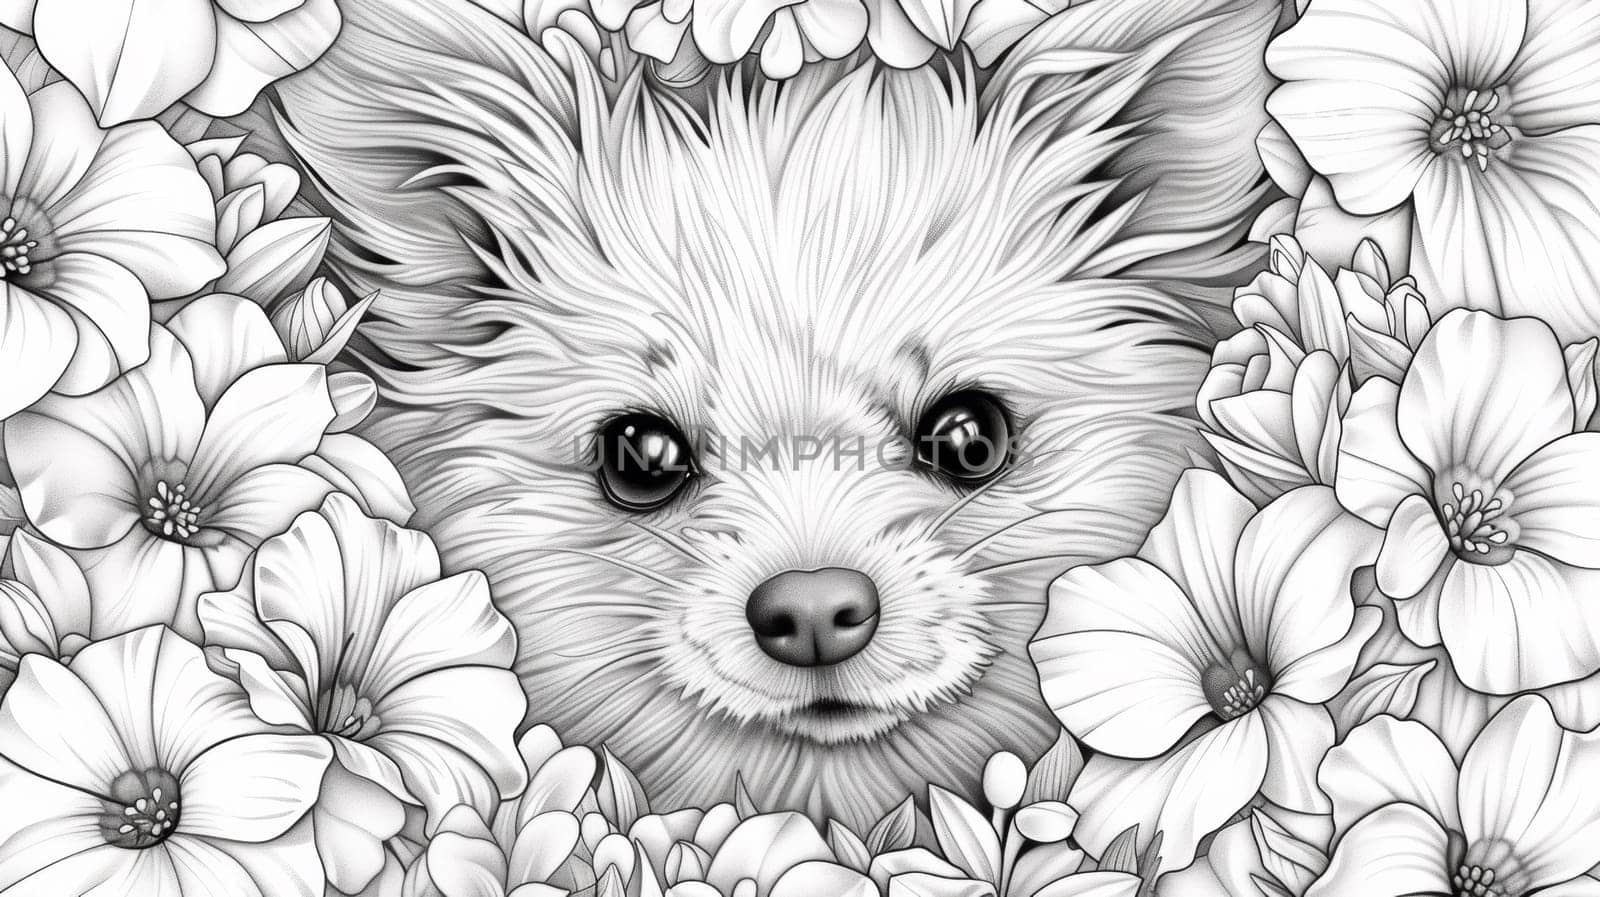 A black and white drawing of a dog surrounded by flowers